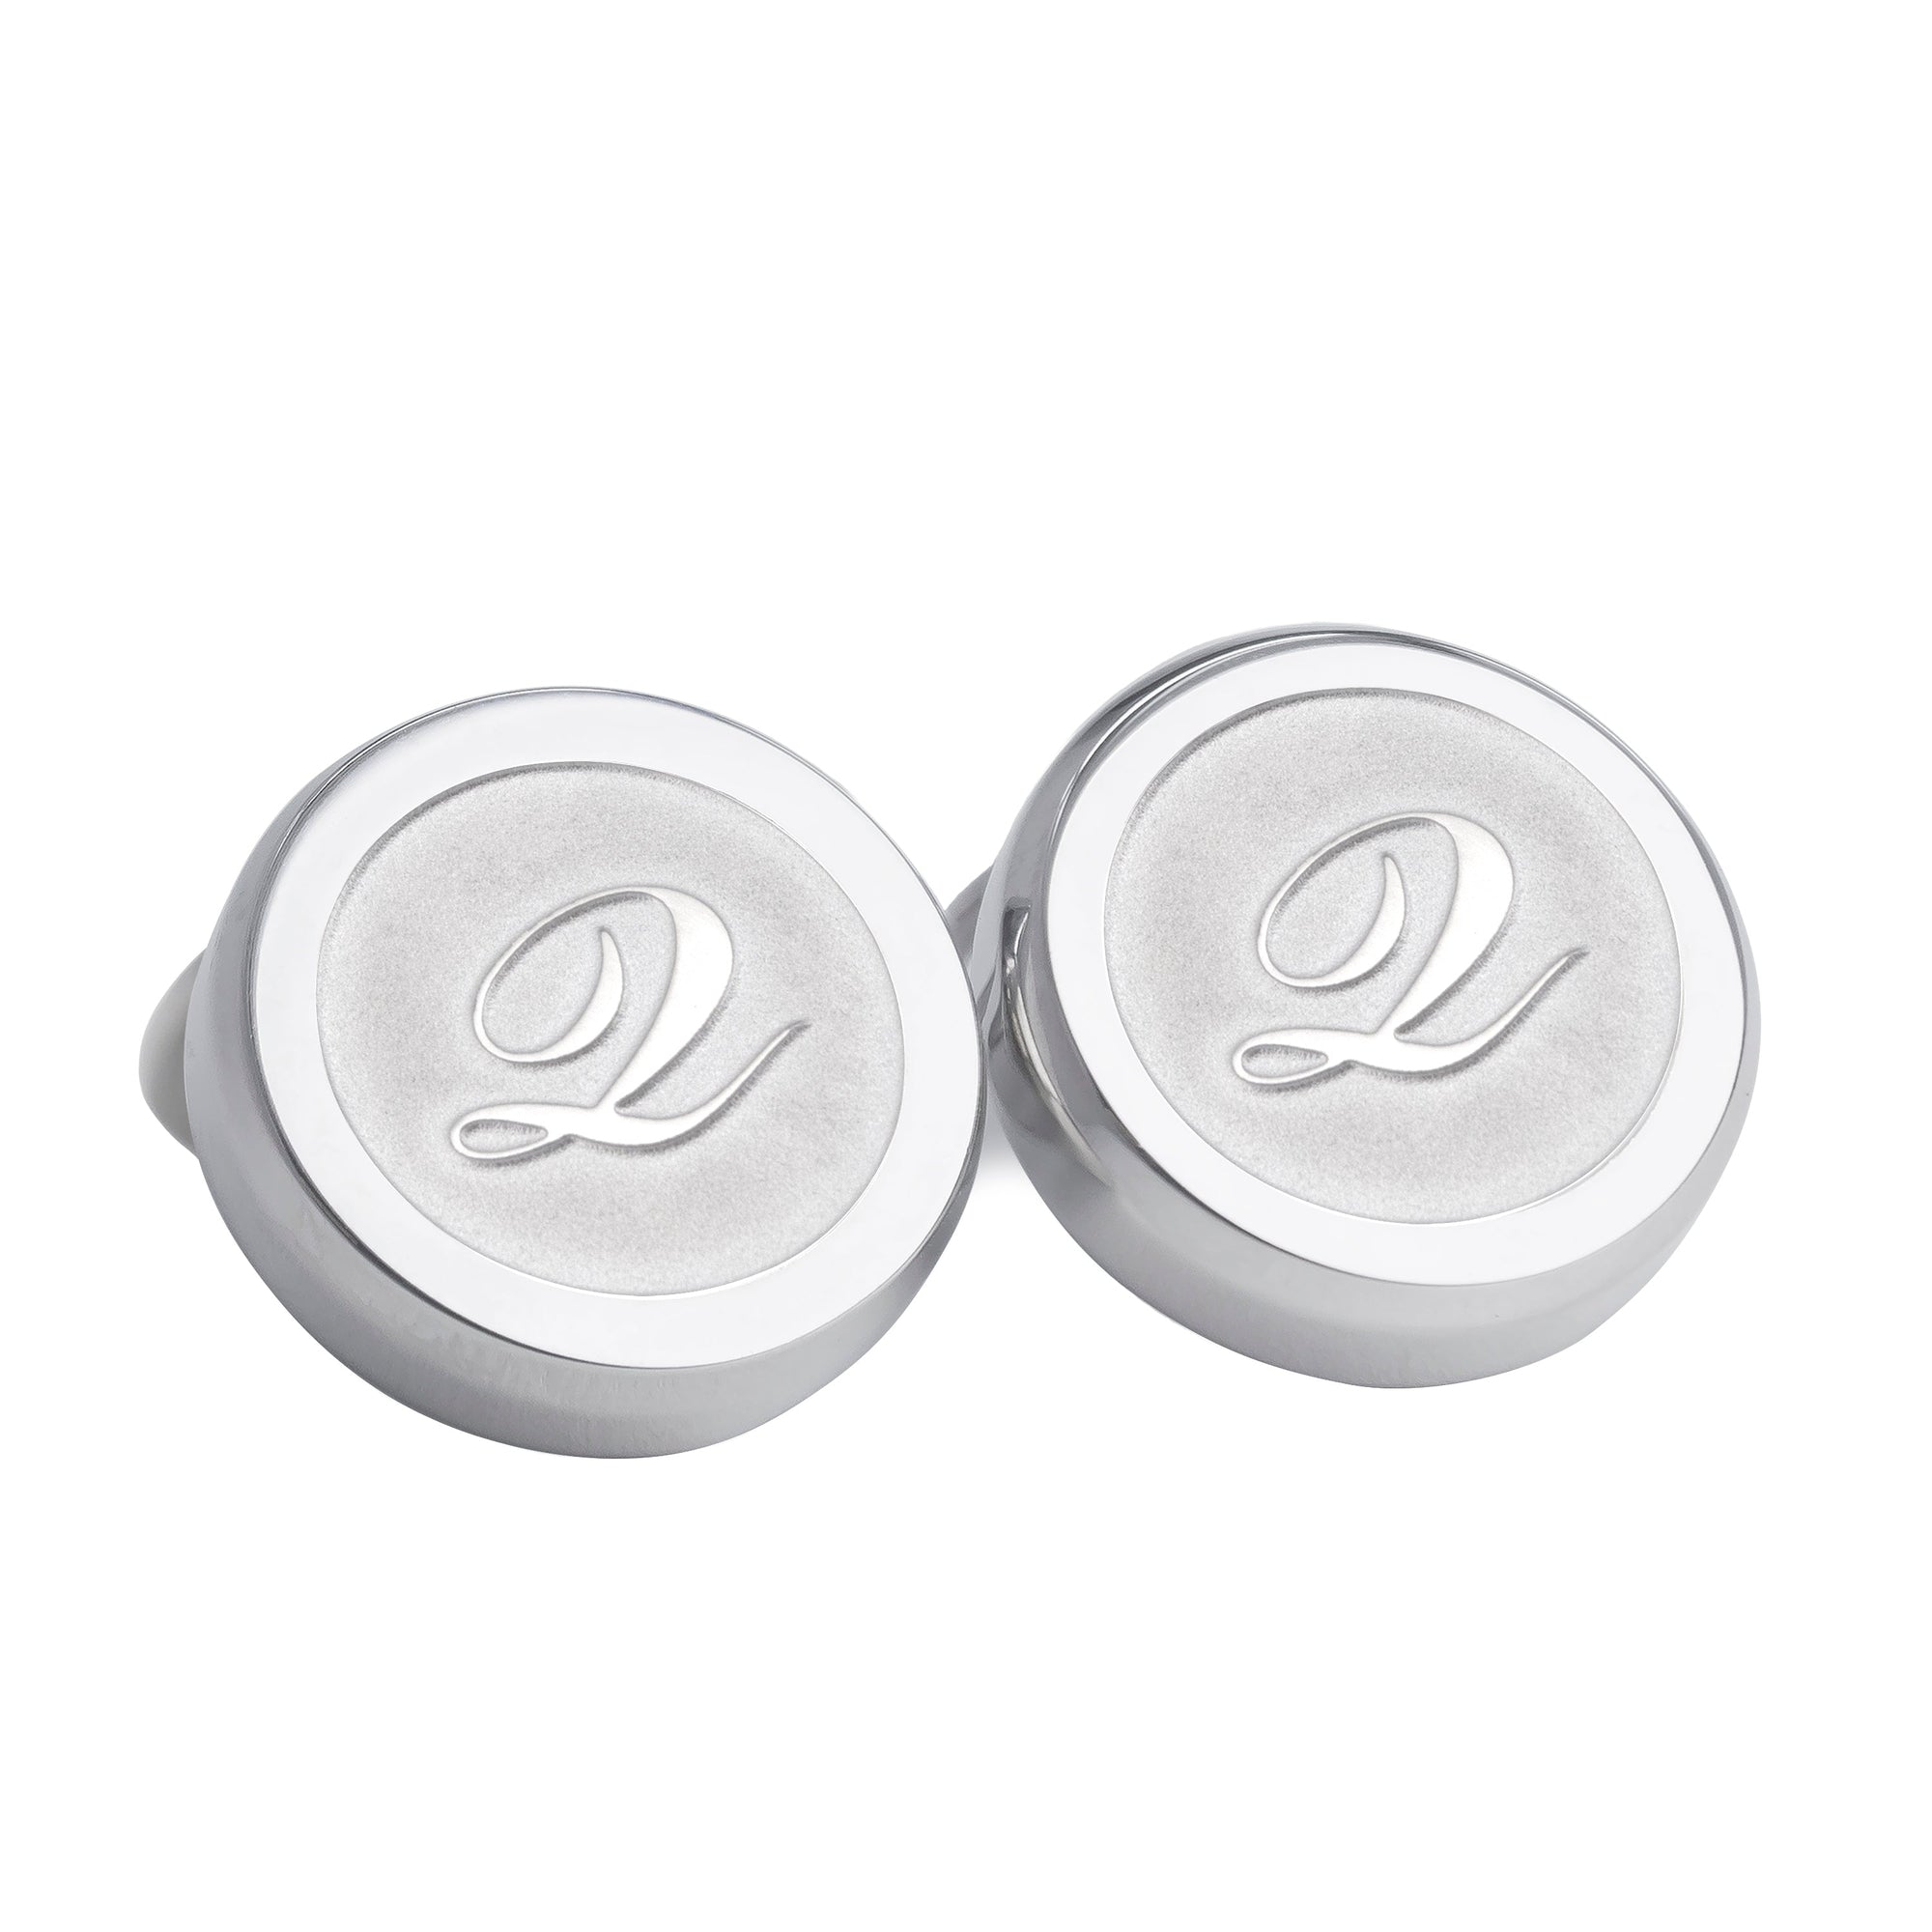 Monogram Etched Silver Clip-on Button Covers-Button Covers-A.Azthom-Q-Cufflinks.com.sg